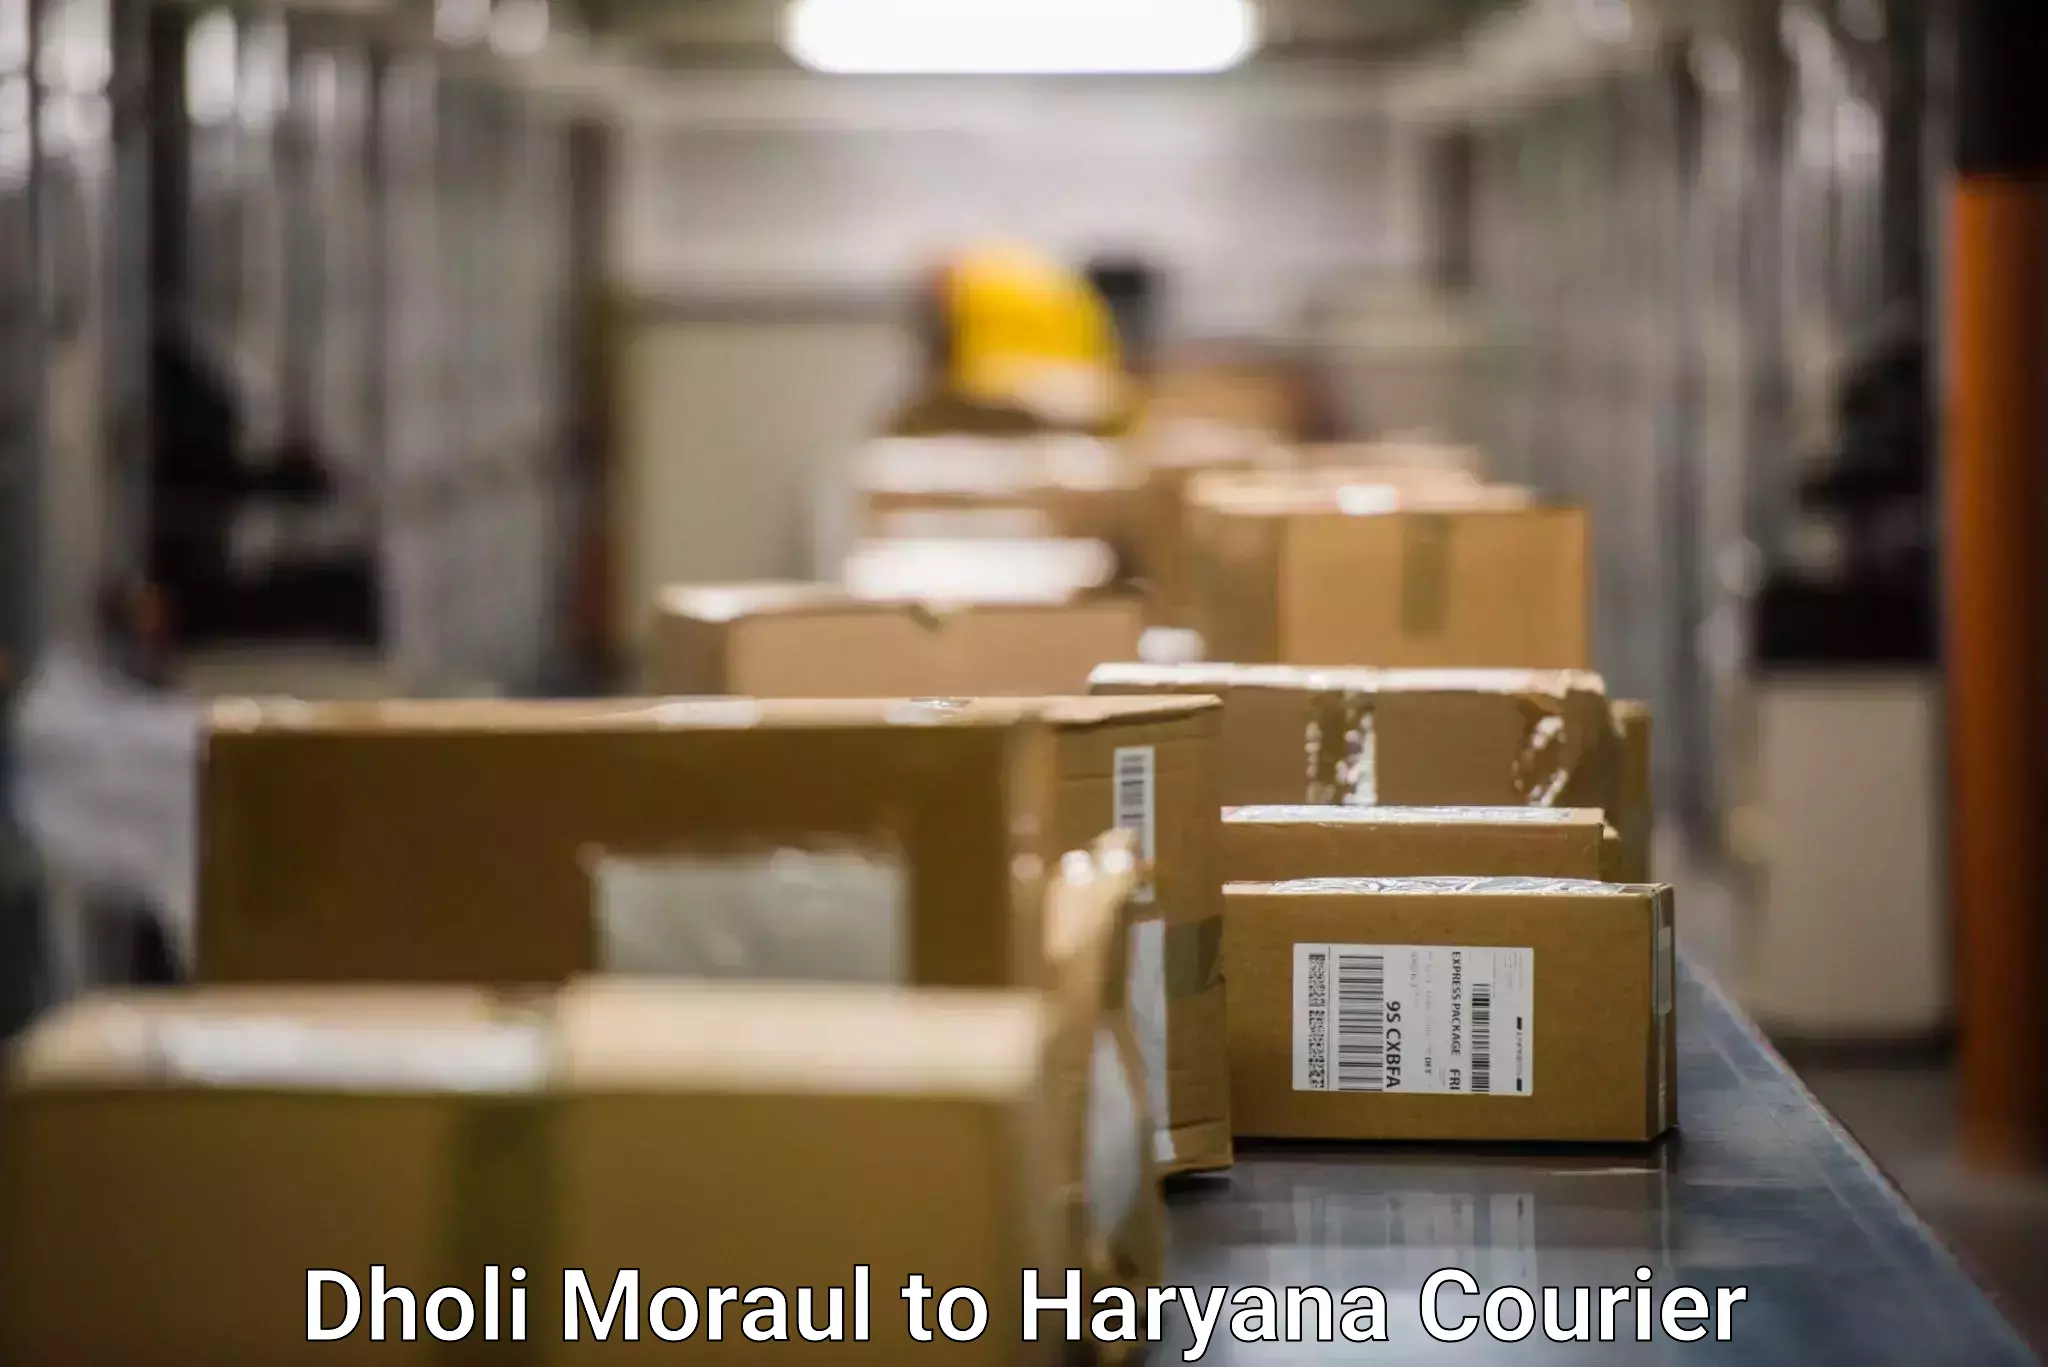 24-hour courier service Dholi Moraul to Chaudhary Charan Singh Haryana Agricultural University Hisar